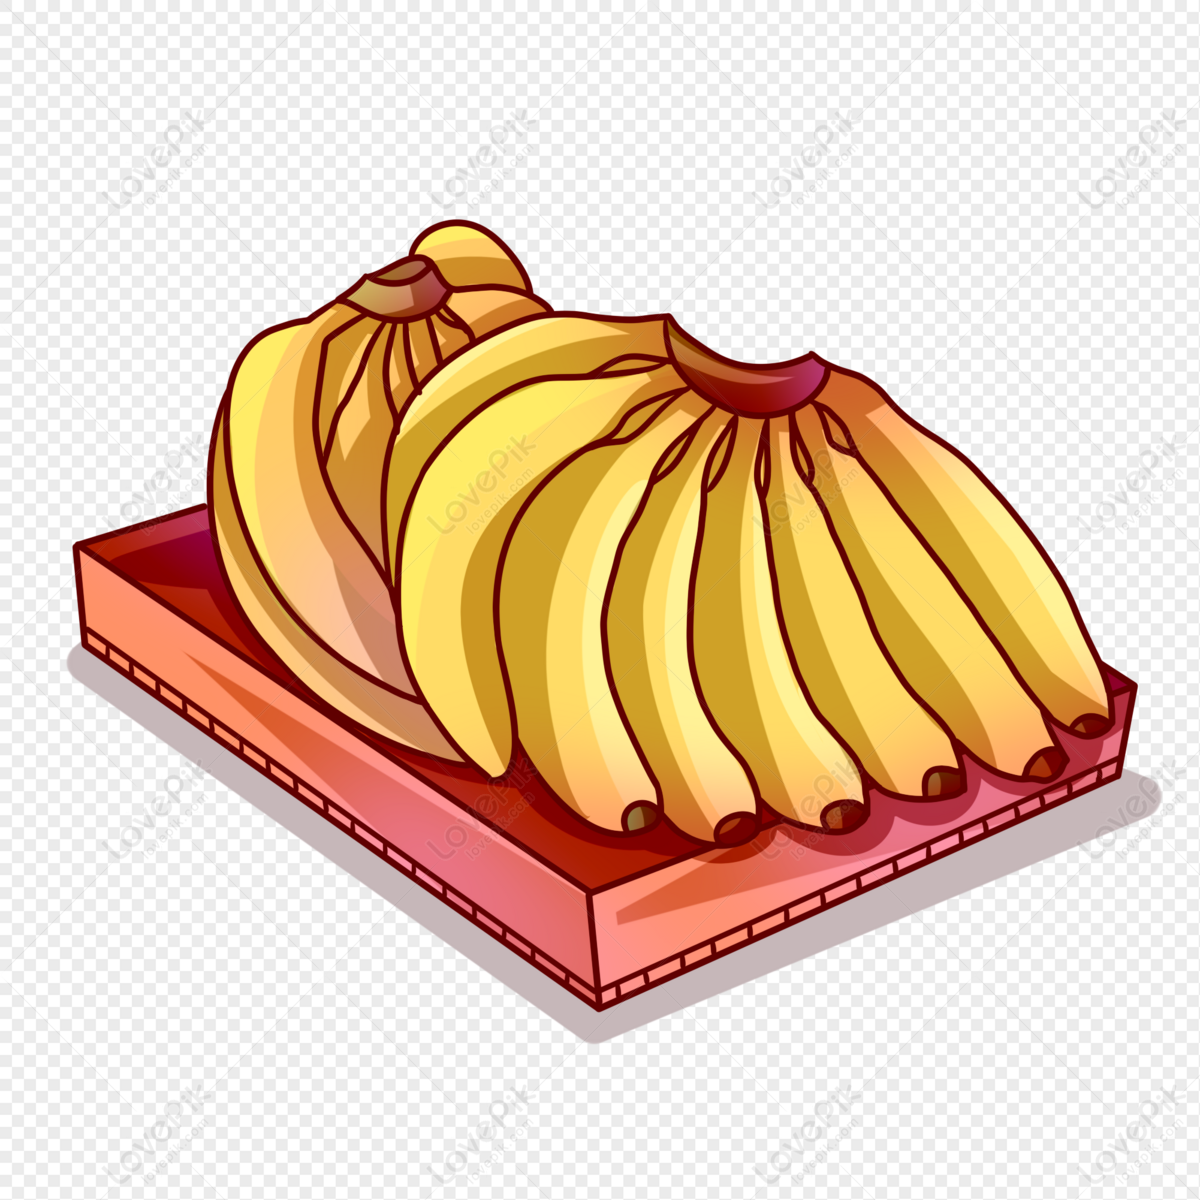 Cartoon Banana Fruit PNG Image And Clipart Image For Free Download -  Lovepik | 401485798